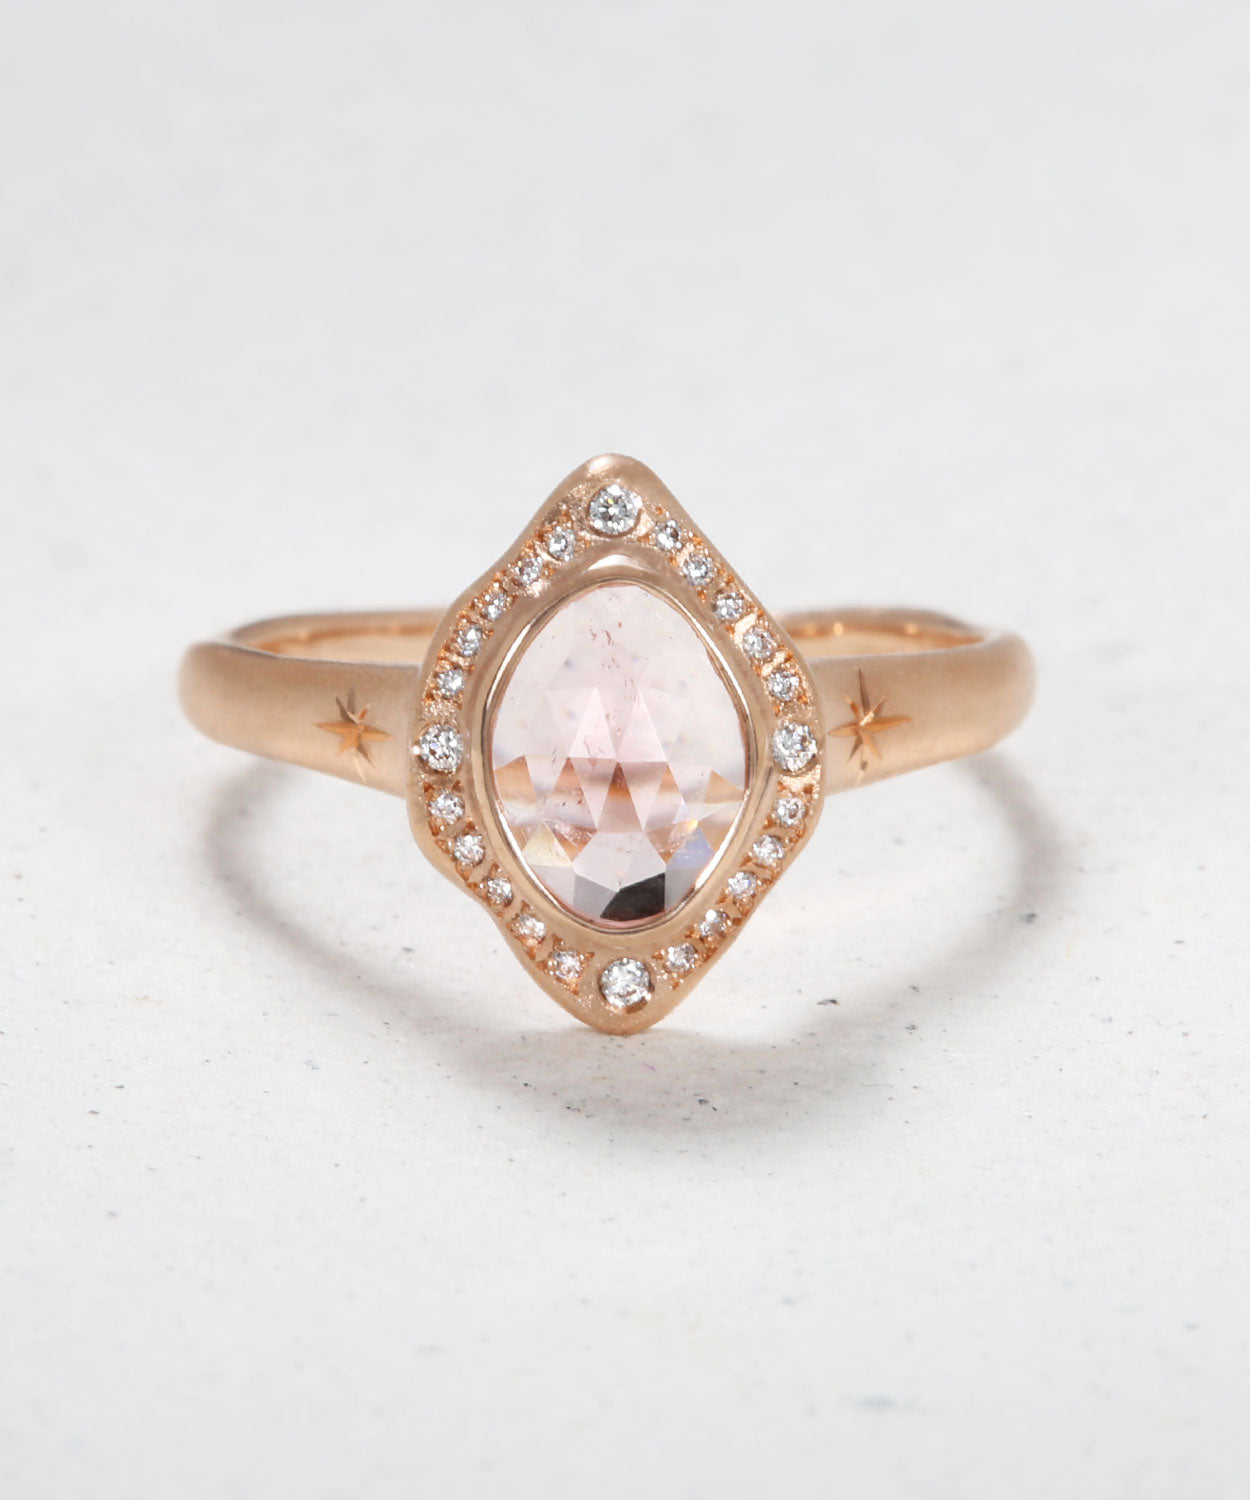 Isadora the Amor Ring